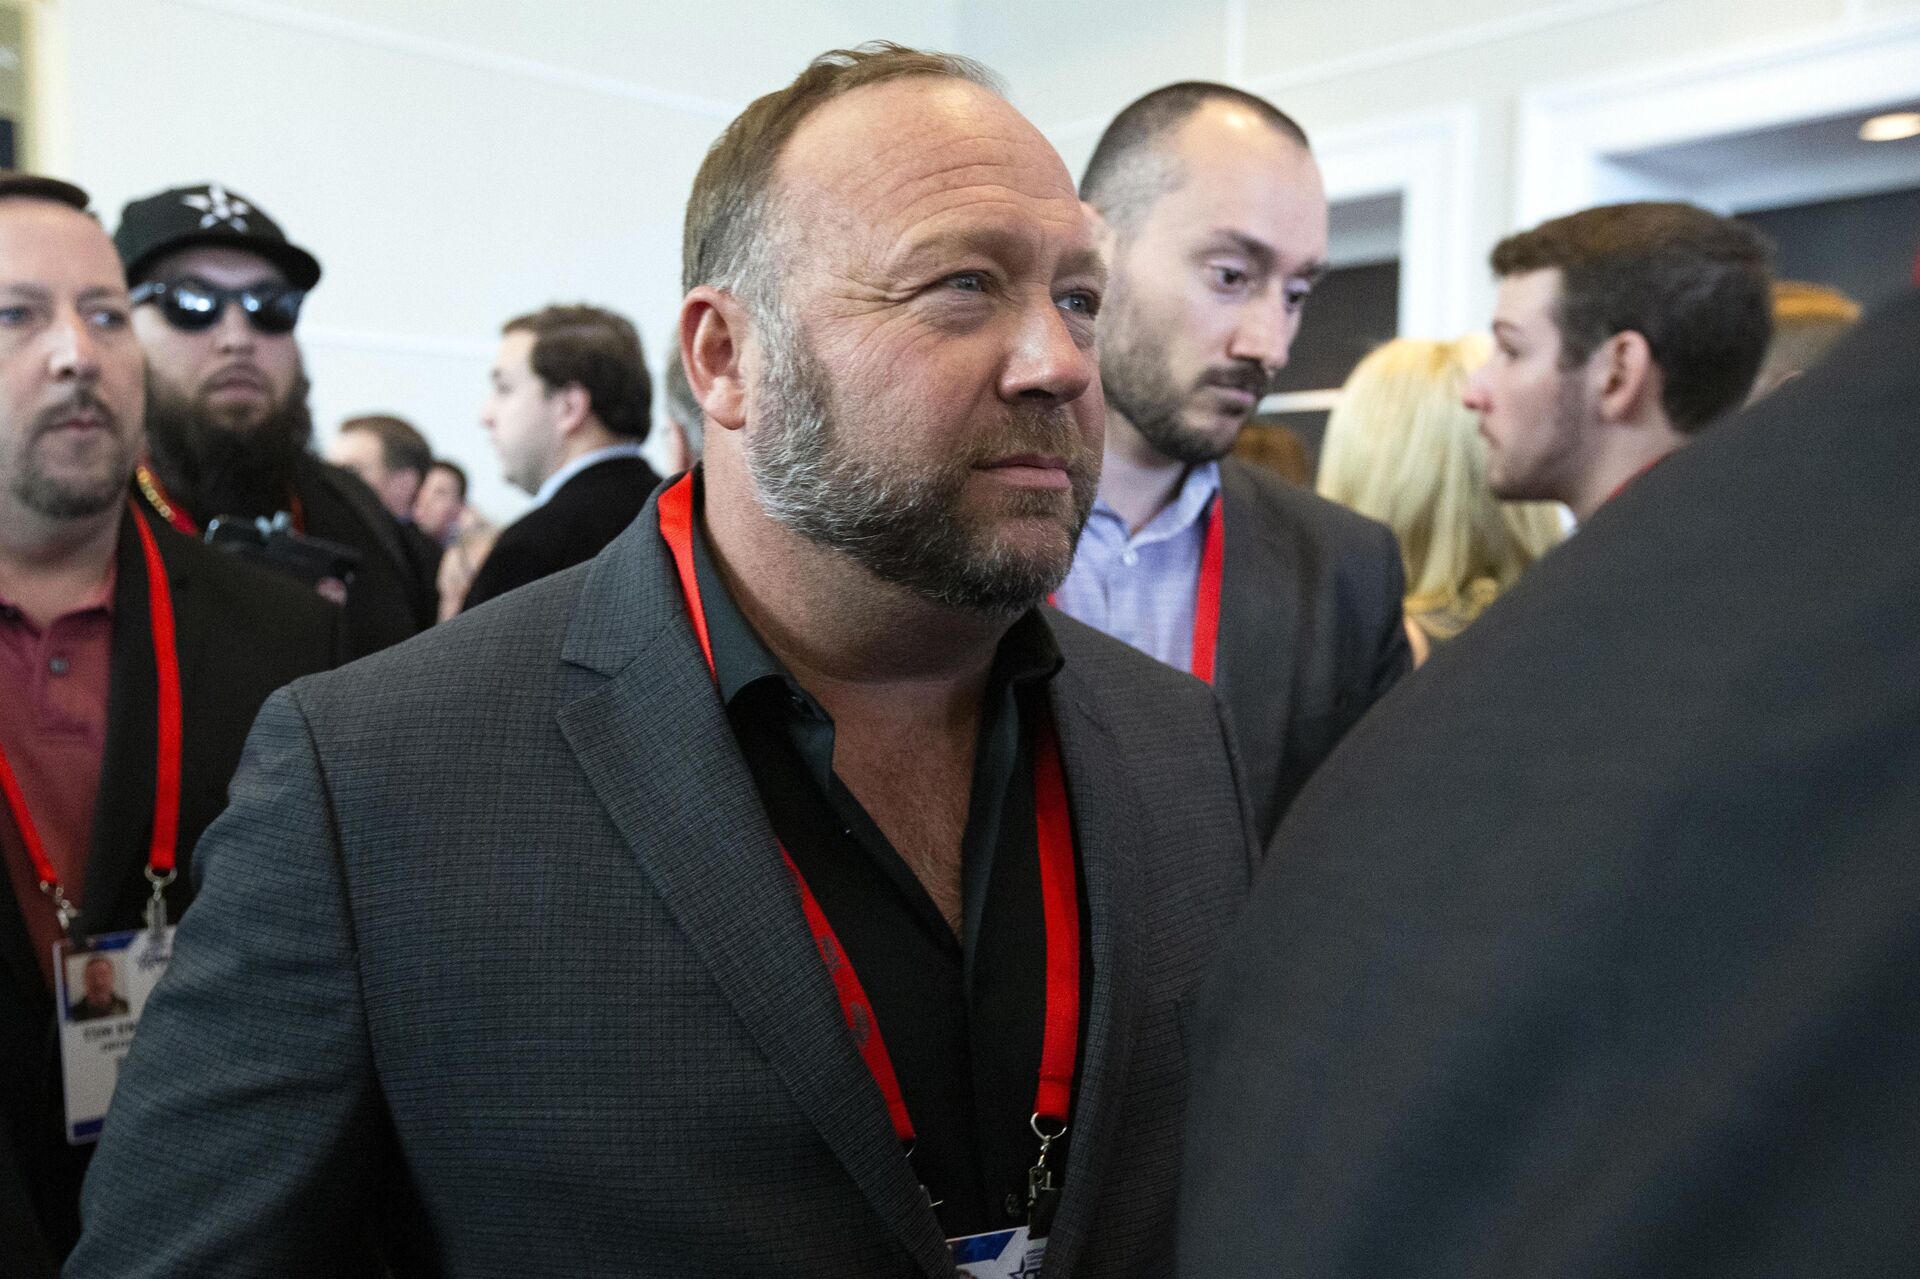 Conspiracy theorist Alex Jones walks at the Conservative Political Action Conference, CPAC 2020, at the National Harbor, in Oxon Hill, Md., Thursday, Feb. 27, 2020 - Sputnik International, 1920, 25.12.2021